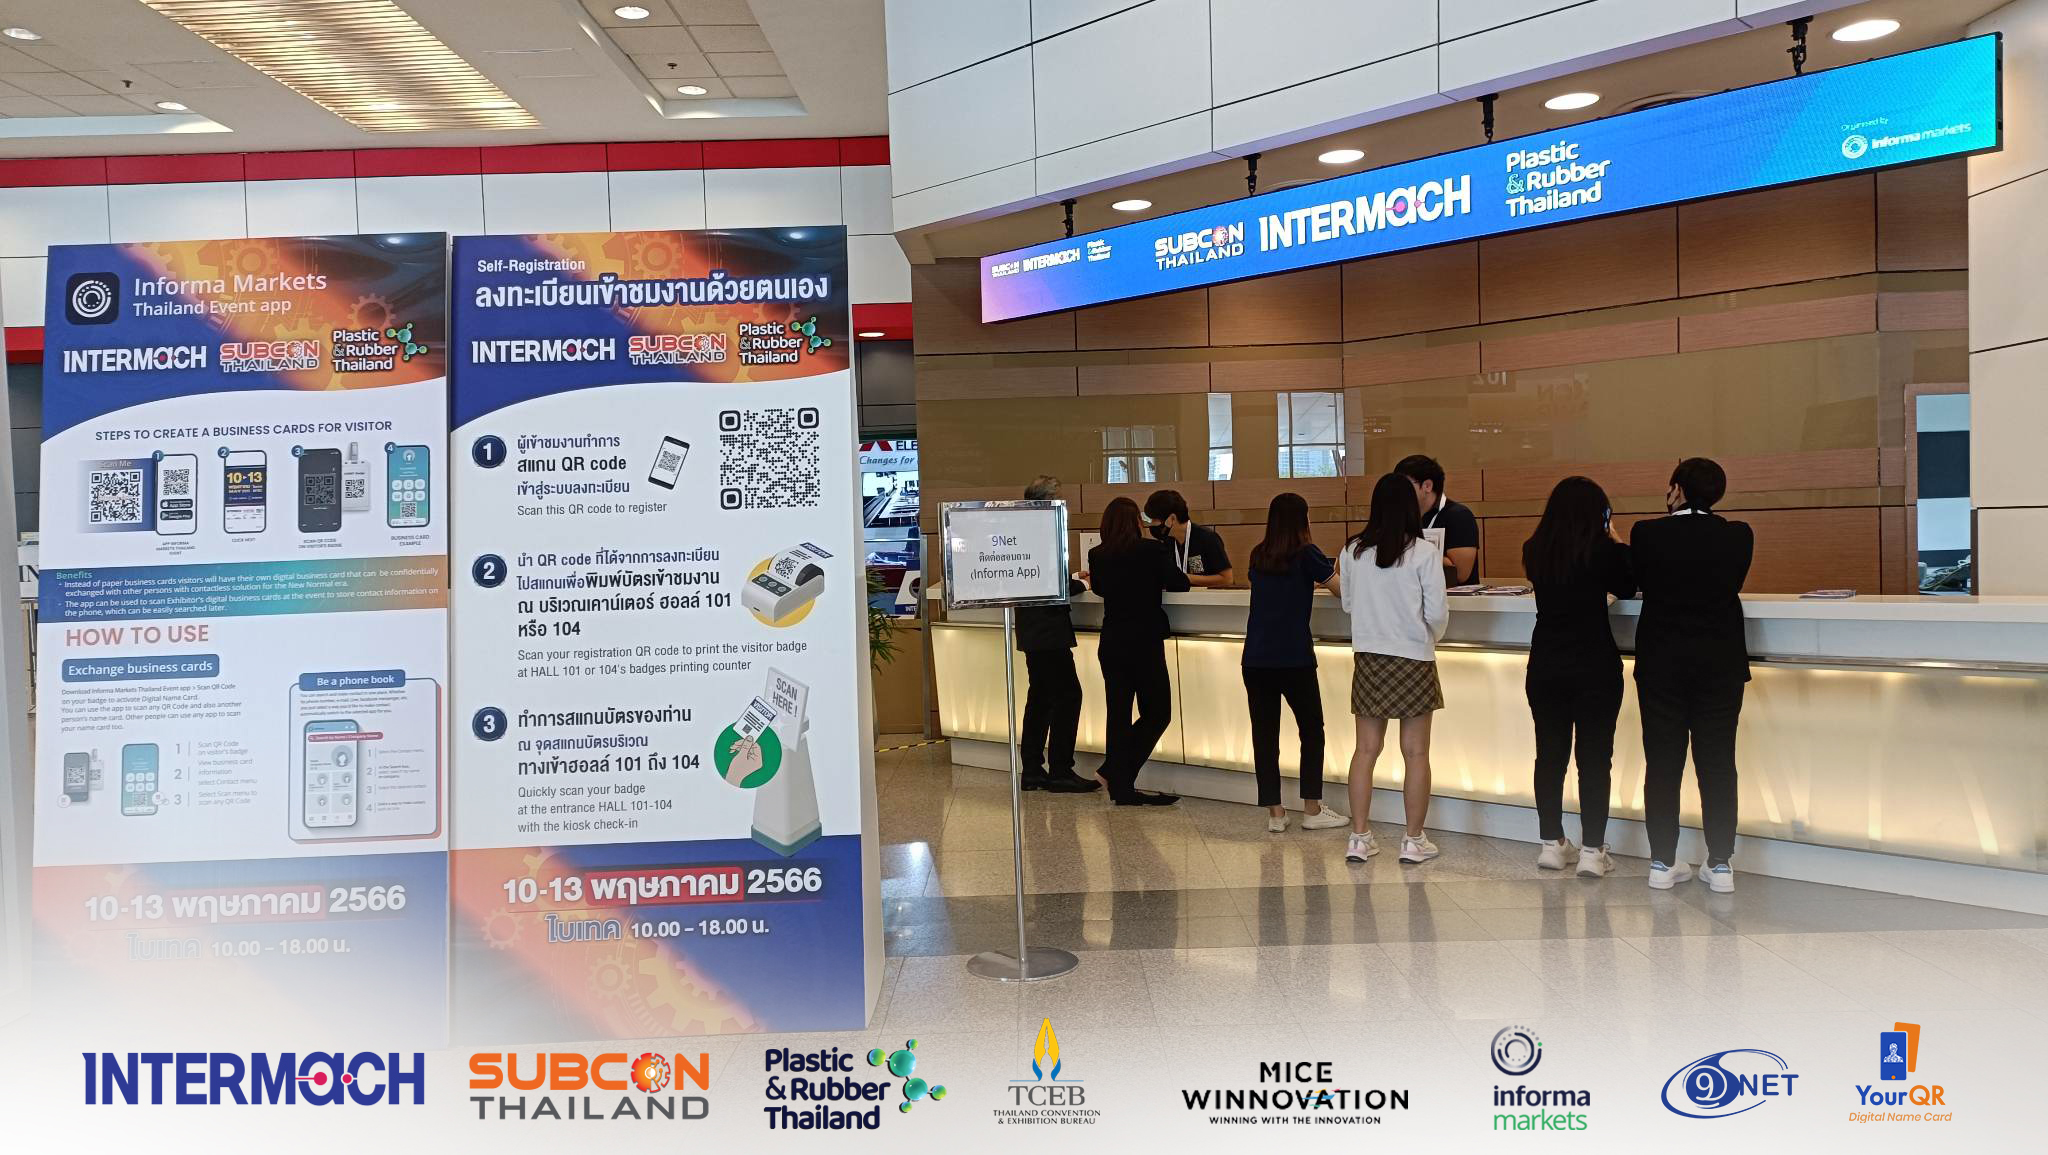 YourQR digital business card contributes to sustainability at INTERMACH and SUBCON THAILAND